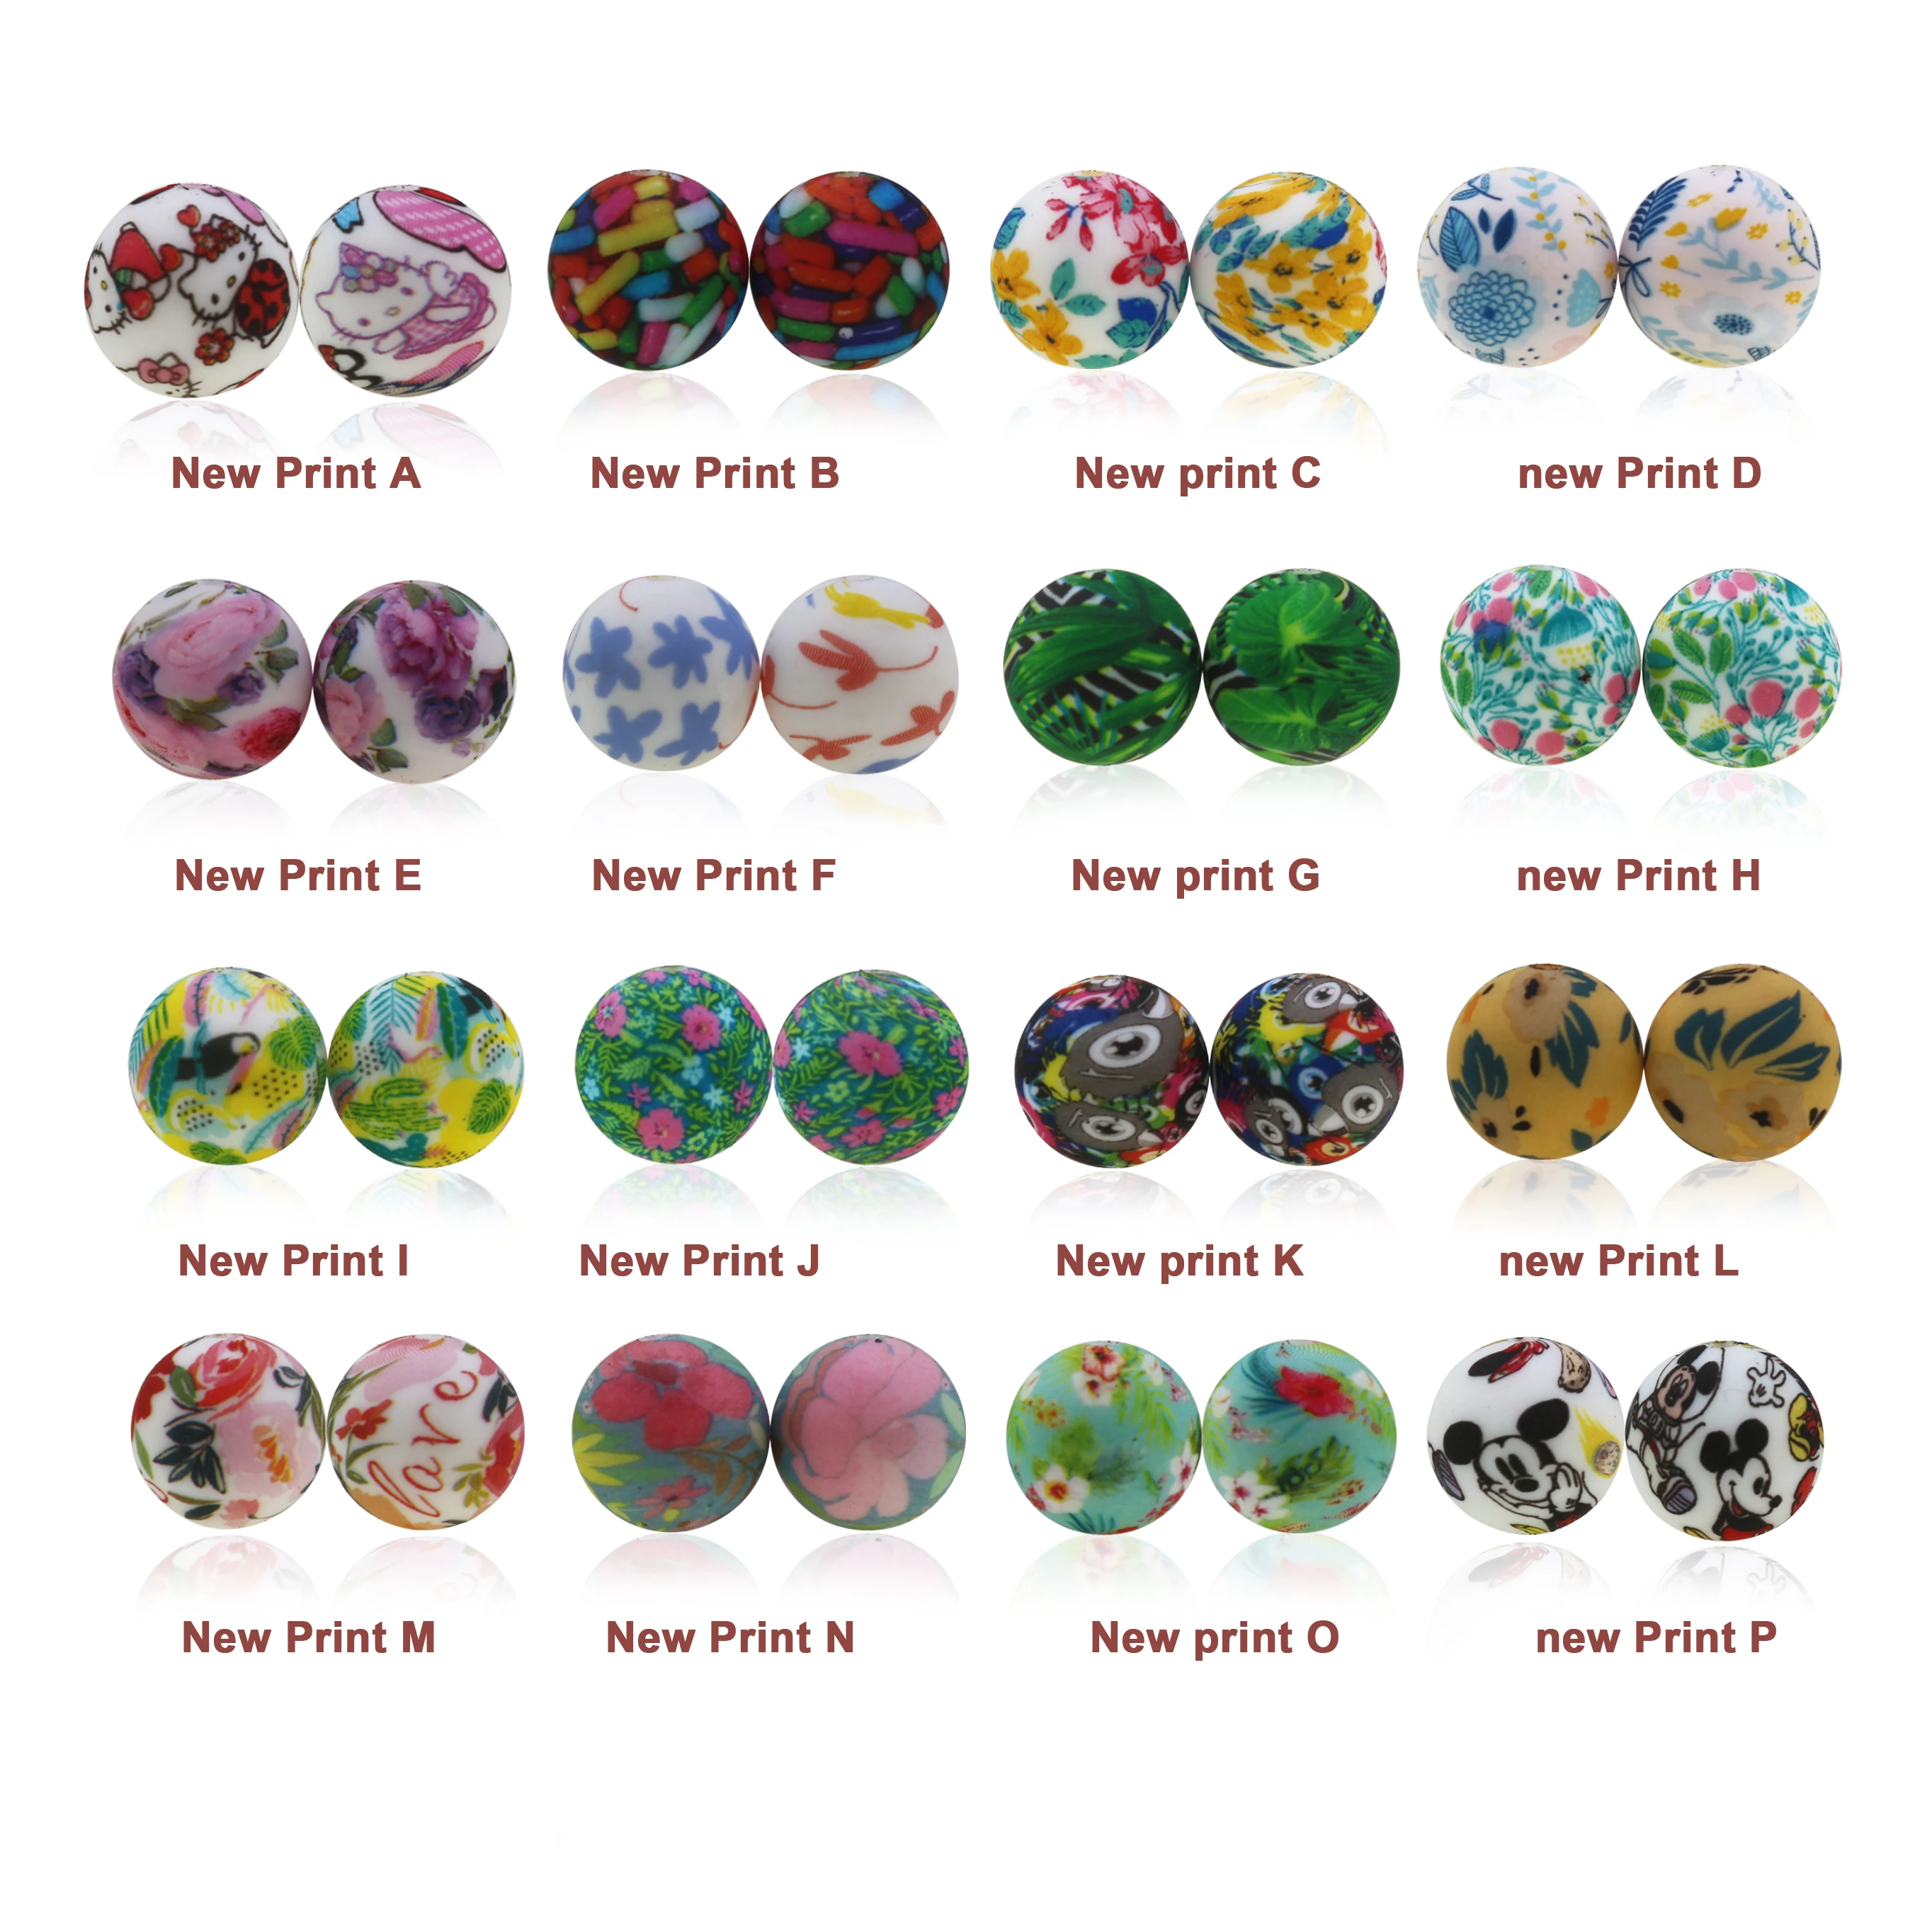 10Pc Mixed Colorful Flowers Print Silicone Beads 15mm Daisy Lotus Leaf  Zephyranthes Pond Lily Prunus Triloba Teething Bead